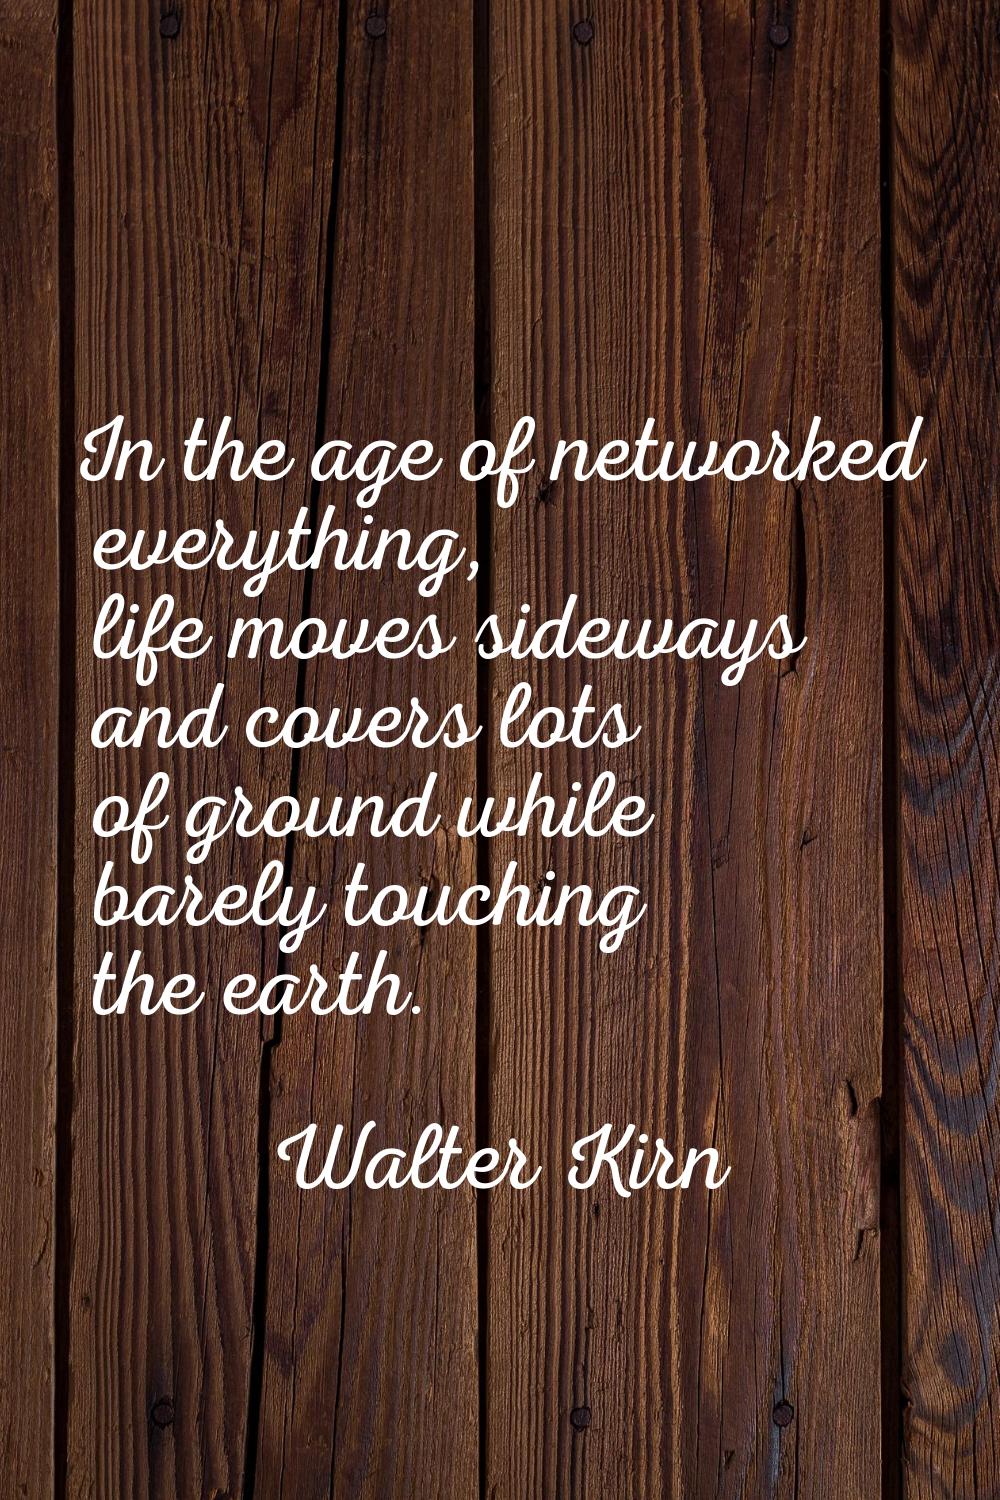 In the age of networked everything, life moves sideways and covers lots of ground while barely touc